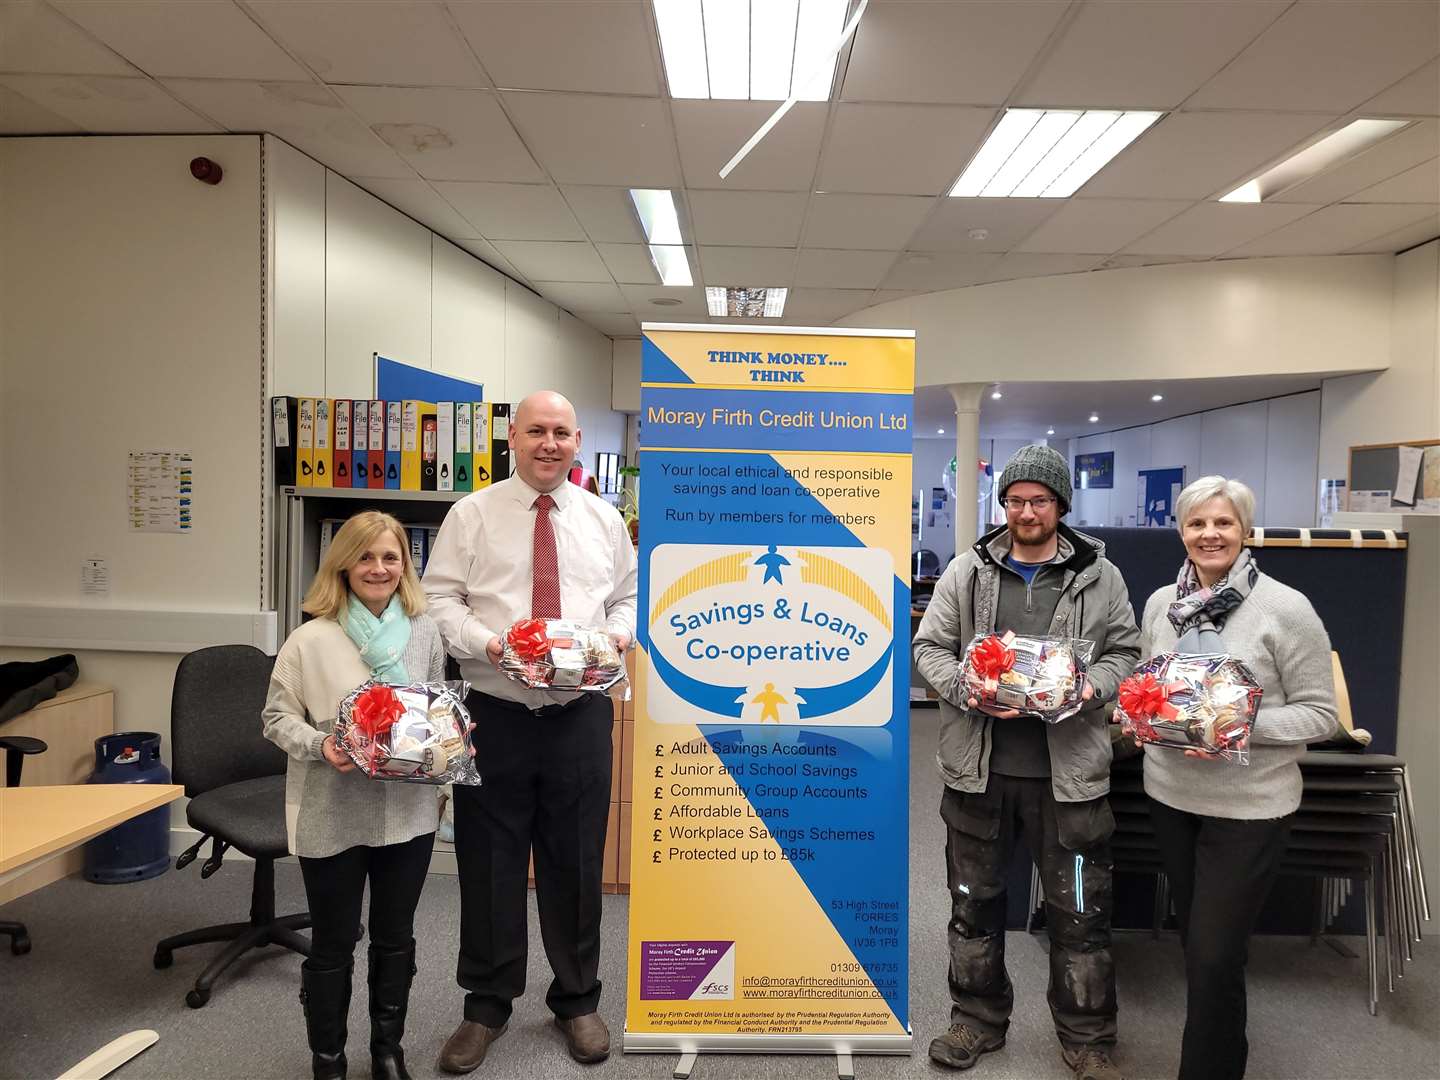 Jackie Nicol, Shaun Moat, Duncan MacKinnon and Jackie Douglas helped distribute the hampers from Moray Firth Credit Union.